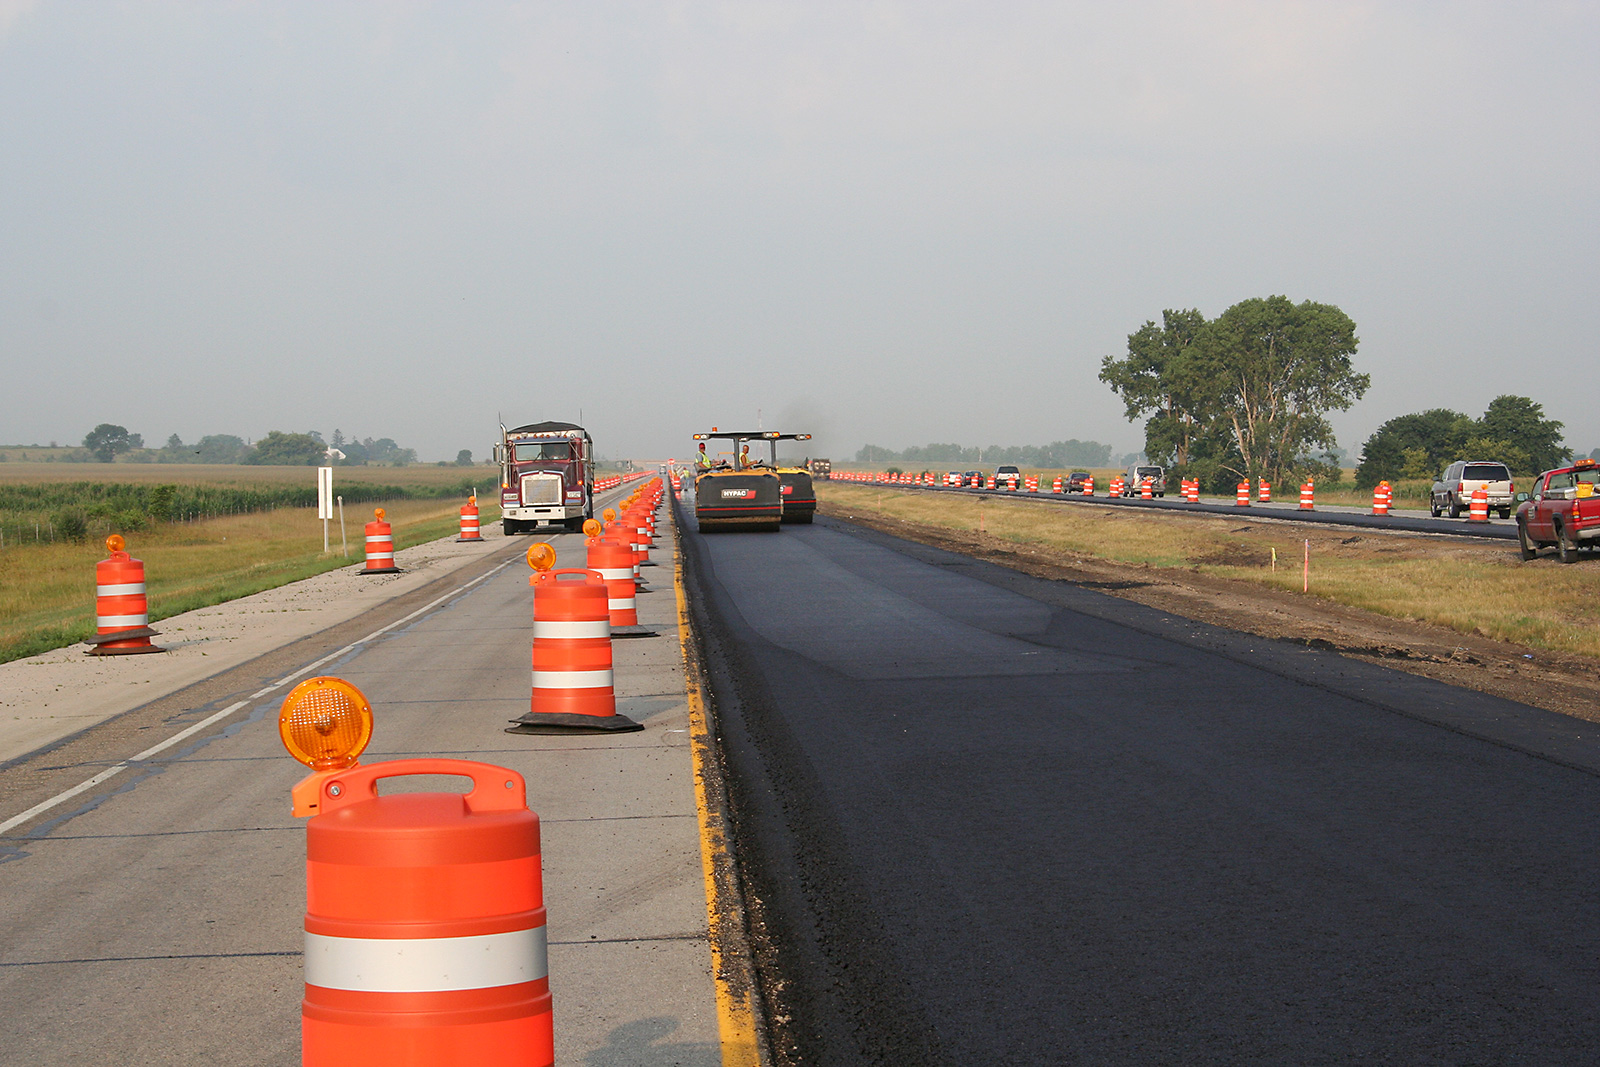 A divided four-lane highway where the two inside lanes are closed to traffic, separated by orange traffic drums. Traffic flows on the open lanes while construction equipment is present on one lane that has been overlayed with new asphalt.